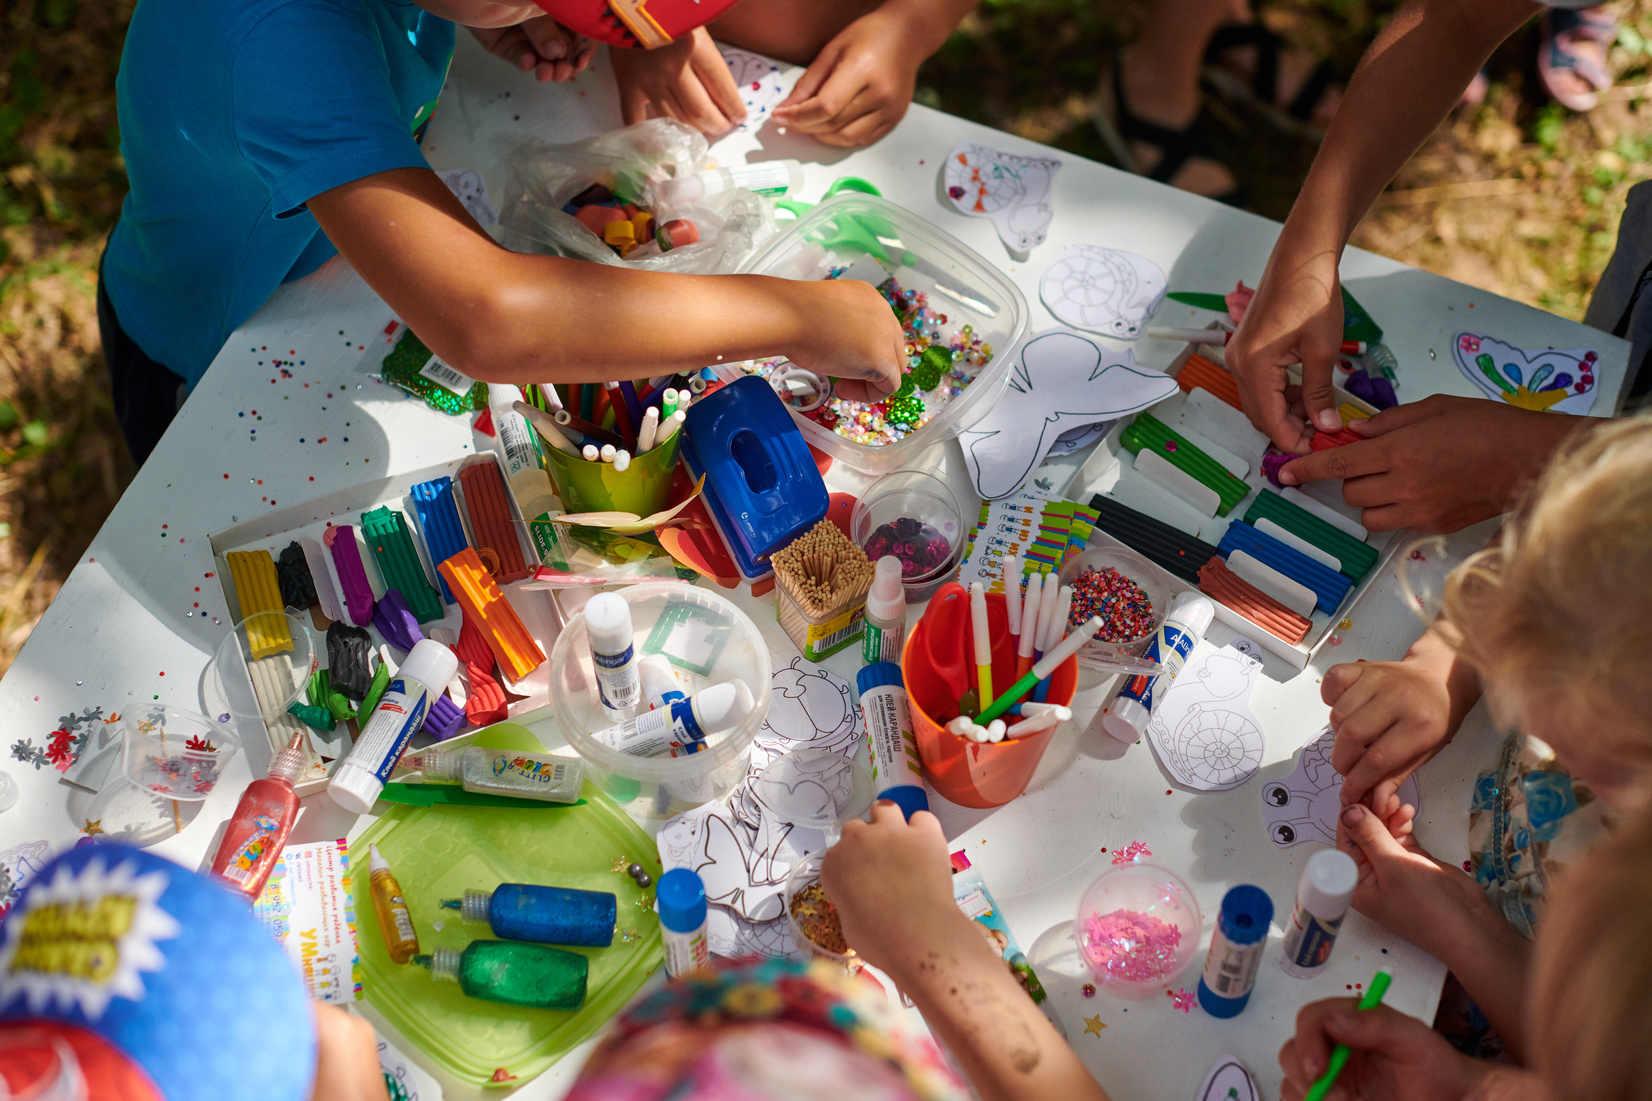 Children paper crafting with parents in outdoor children party, painting, molding of plasticine